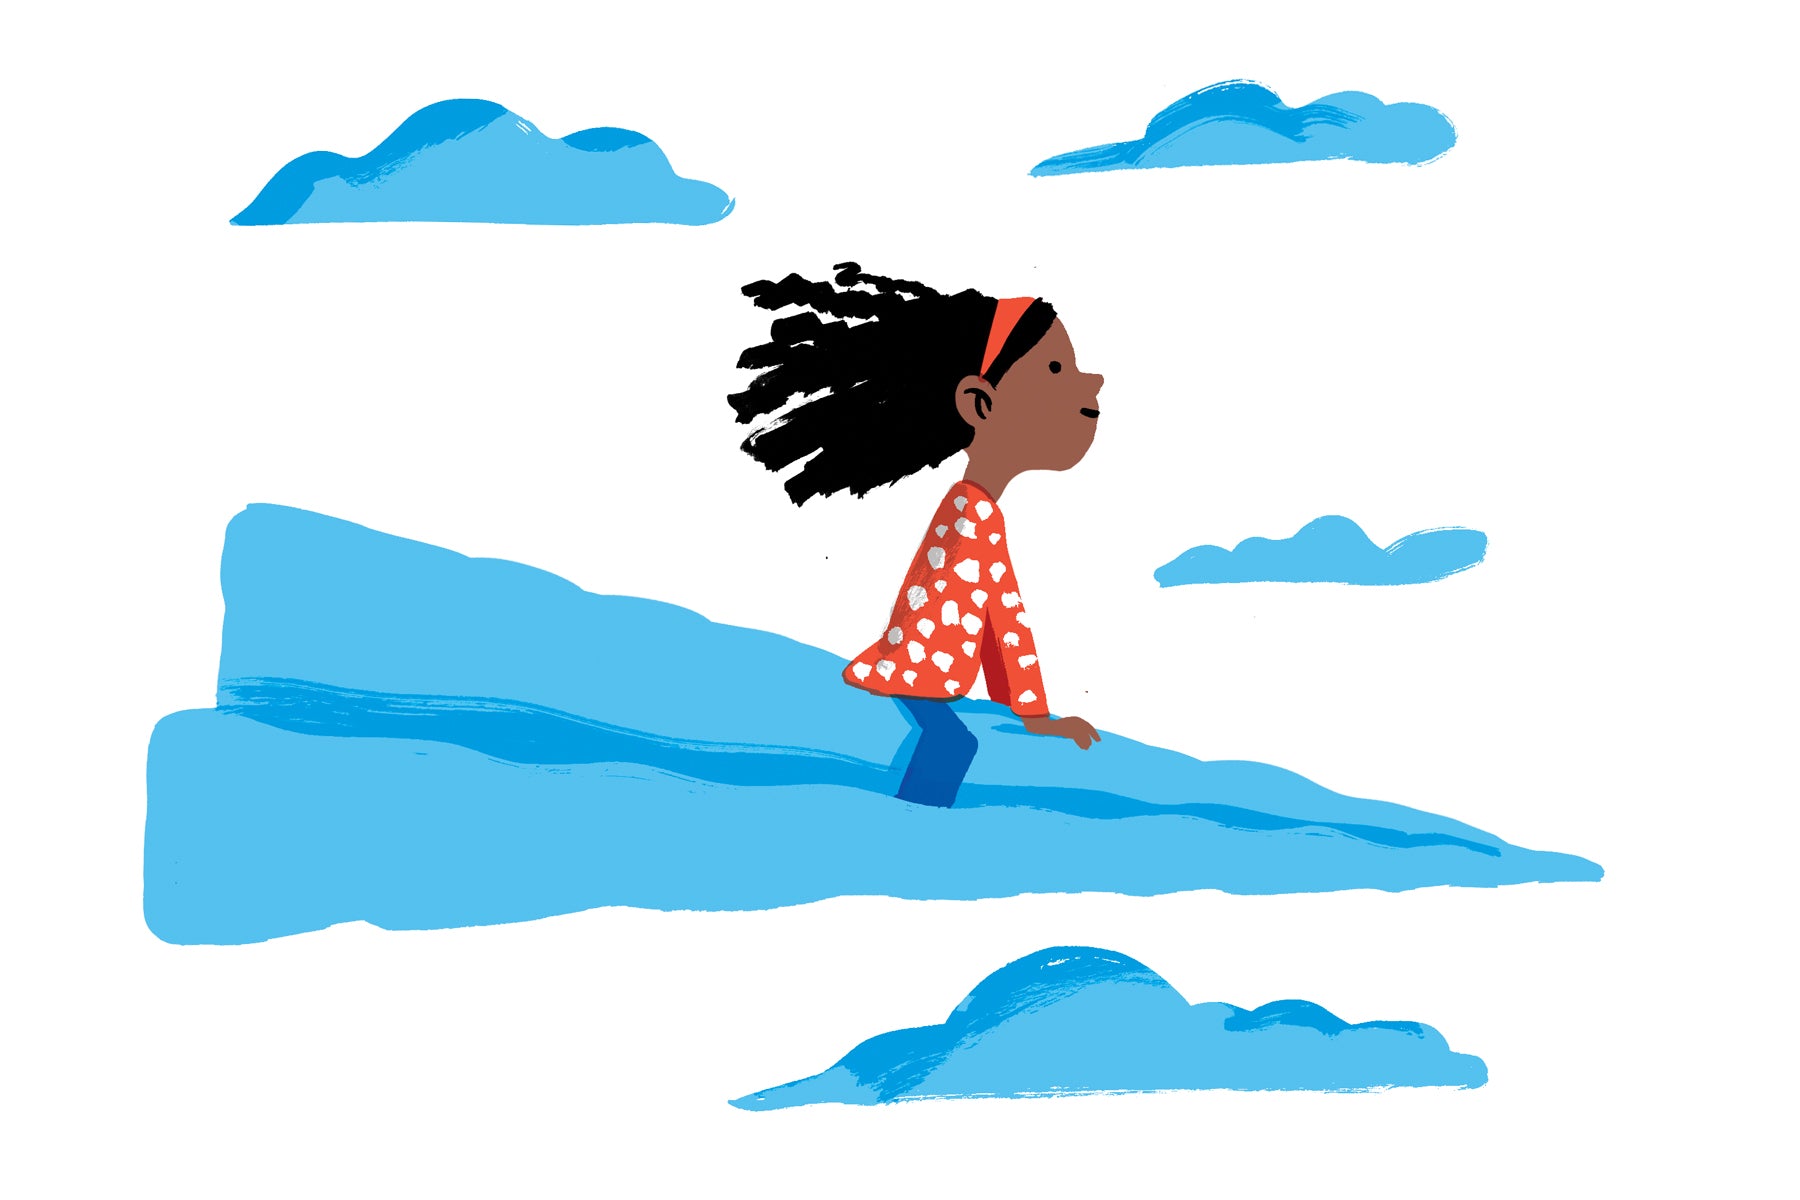 Illustration of a little girl riding on a paper airplane, through the clouds.